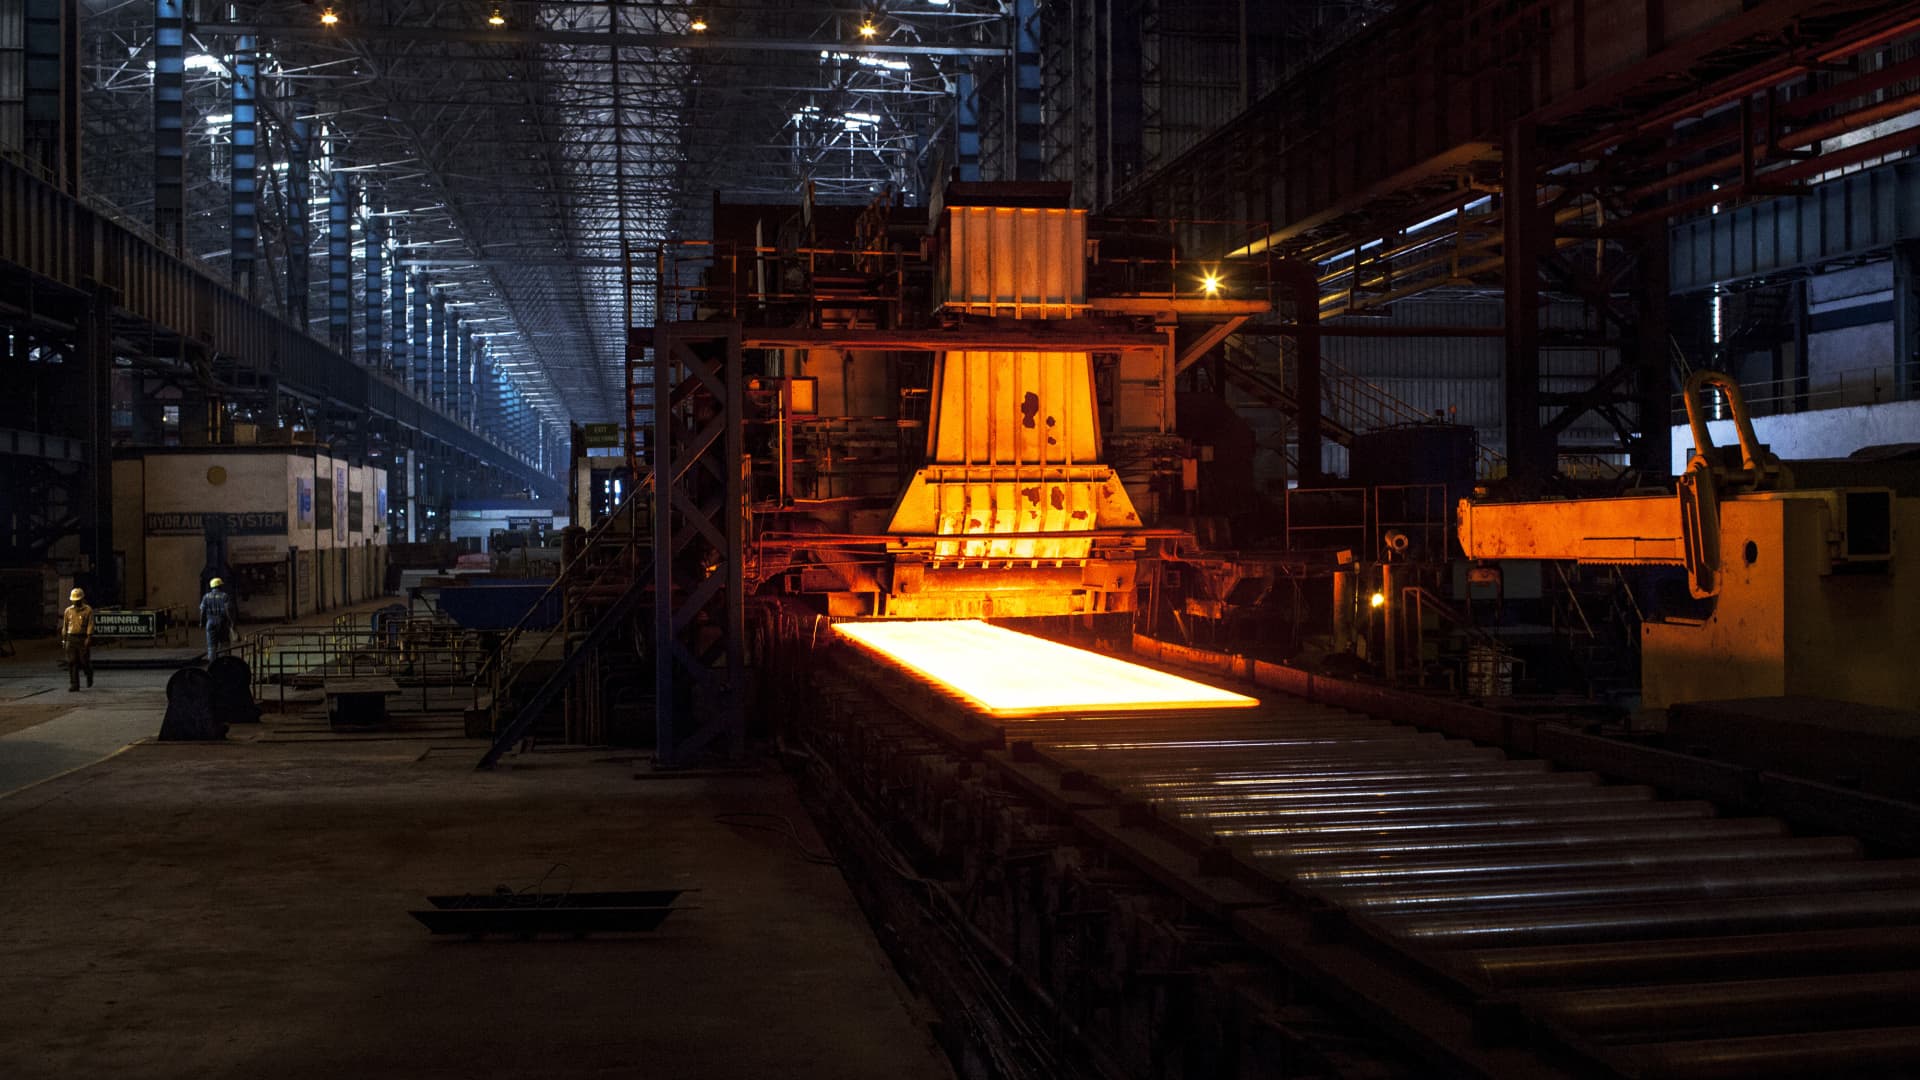 The plate mill of the Jindal Steel and Power Ltd. plant in Raigarh, Chhattisgargh, India, on Feb. 11, 2015.